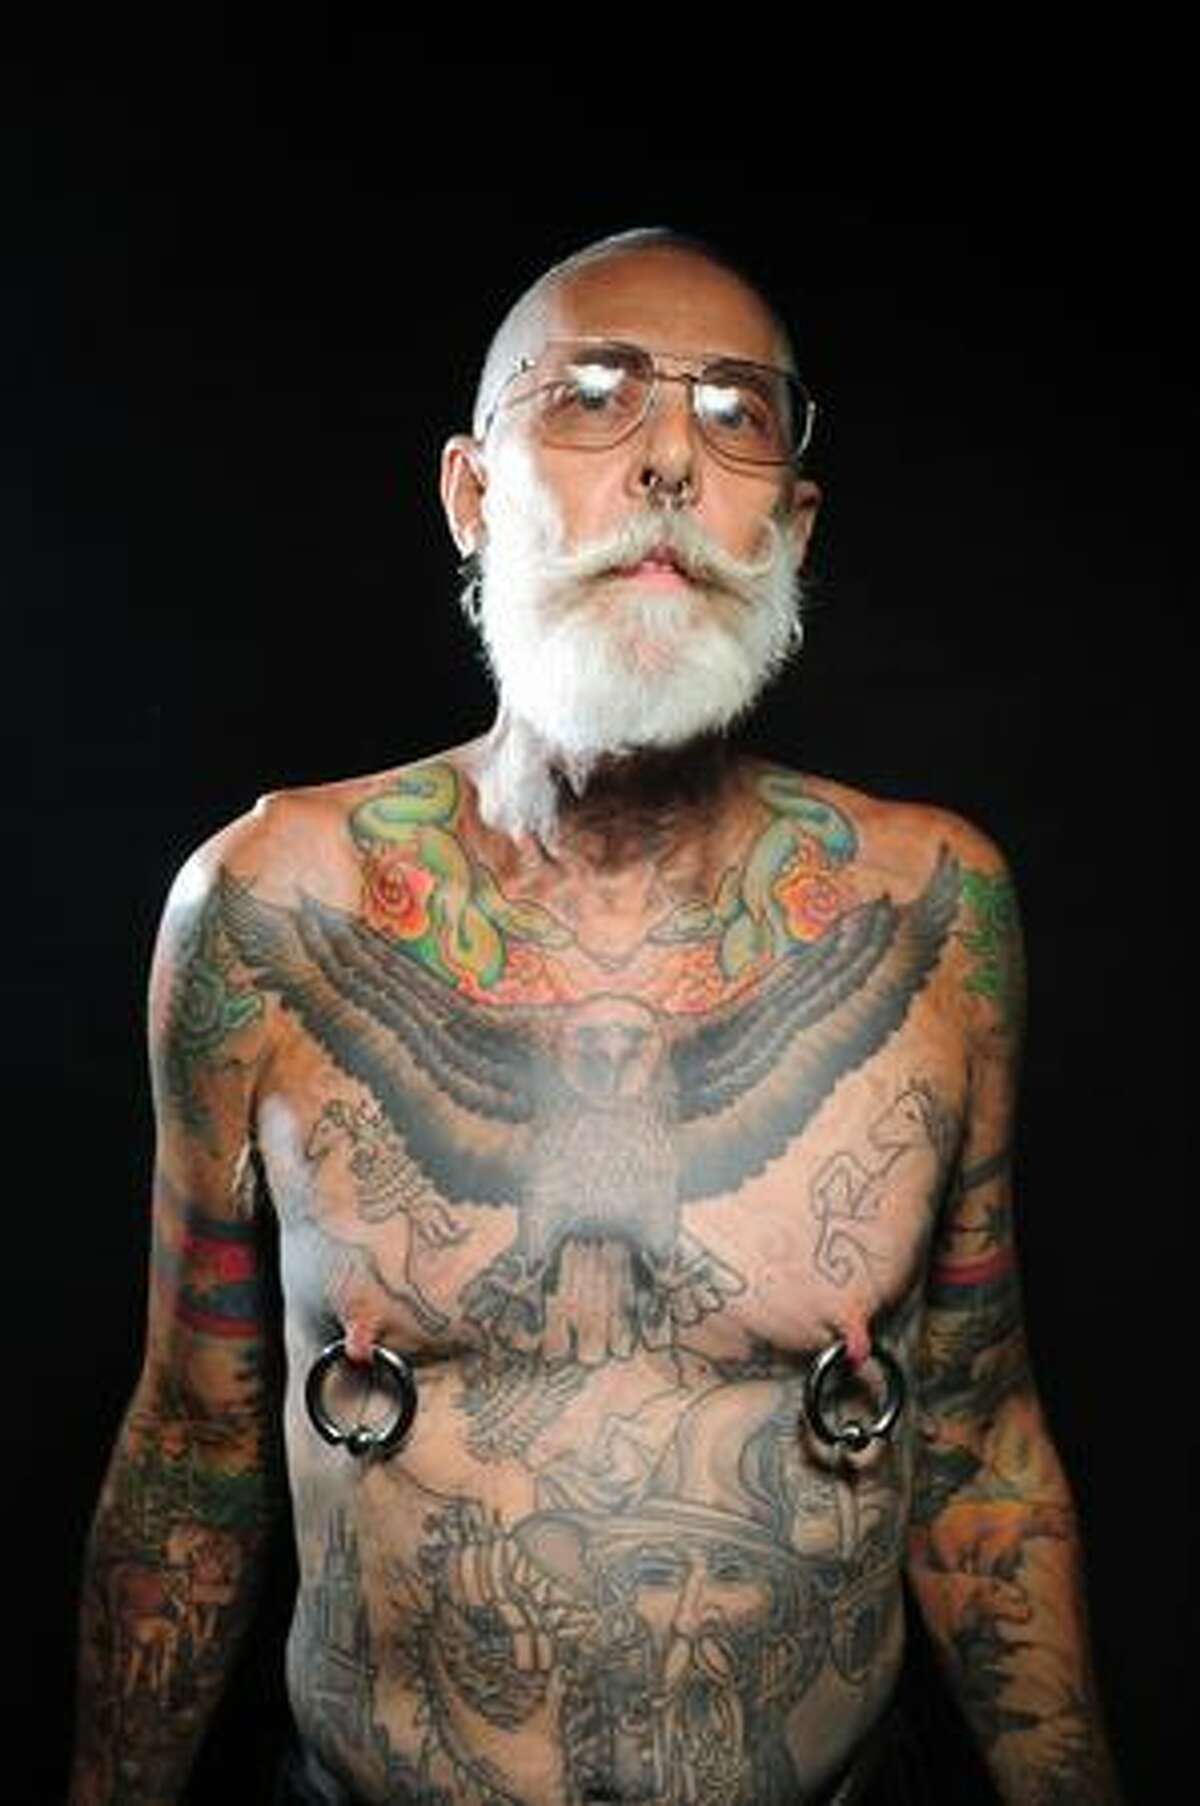 Dan Adcock poses for a portrait during day 1 of the Seattle Tattoo Expo at Seattle Center Friday August 7, 2009. The expo continues until Sunday evening. Photo by Daniel Berman/SeattlePI.com